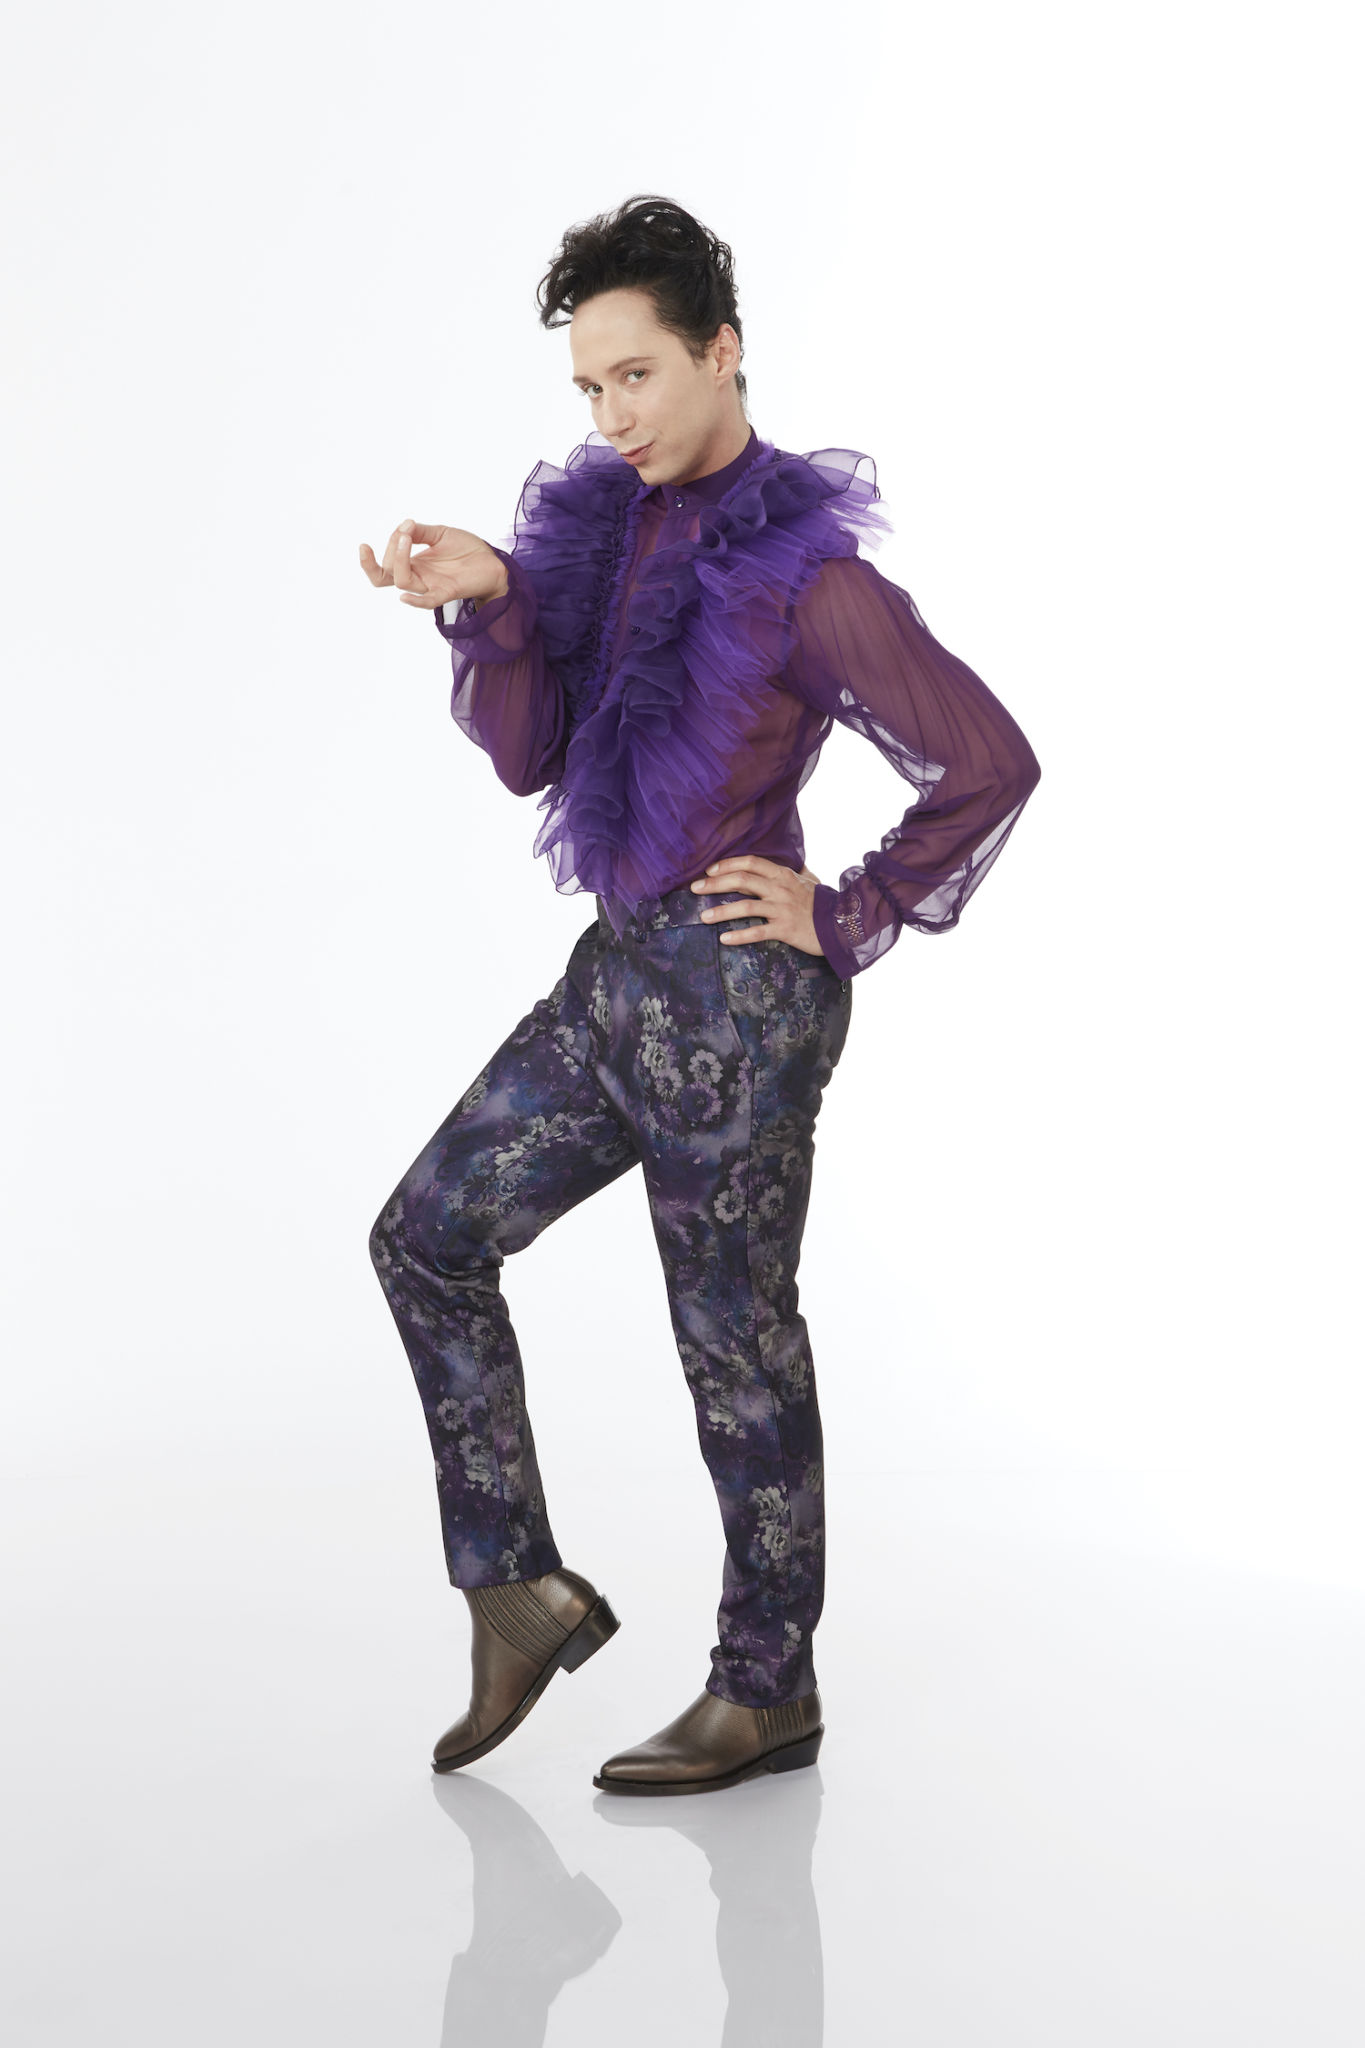 Dancing With the Stars Season 29 Celebrity - Johnny Weir